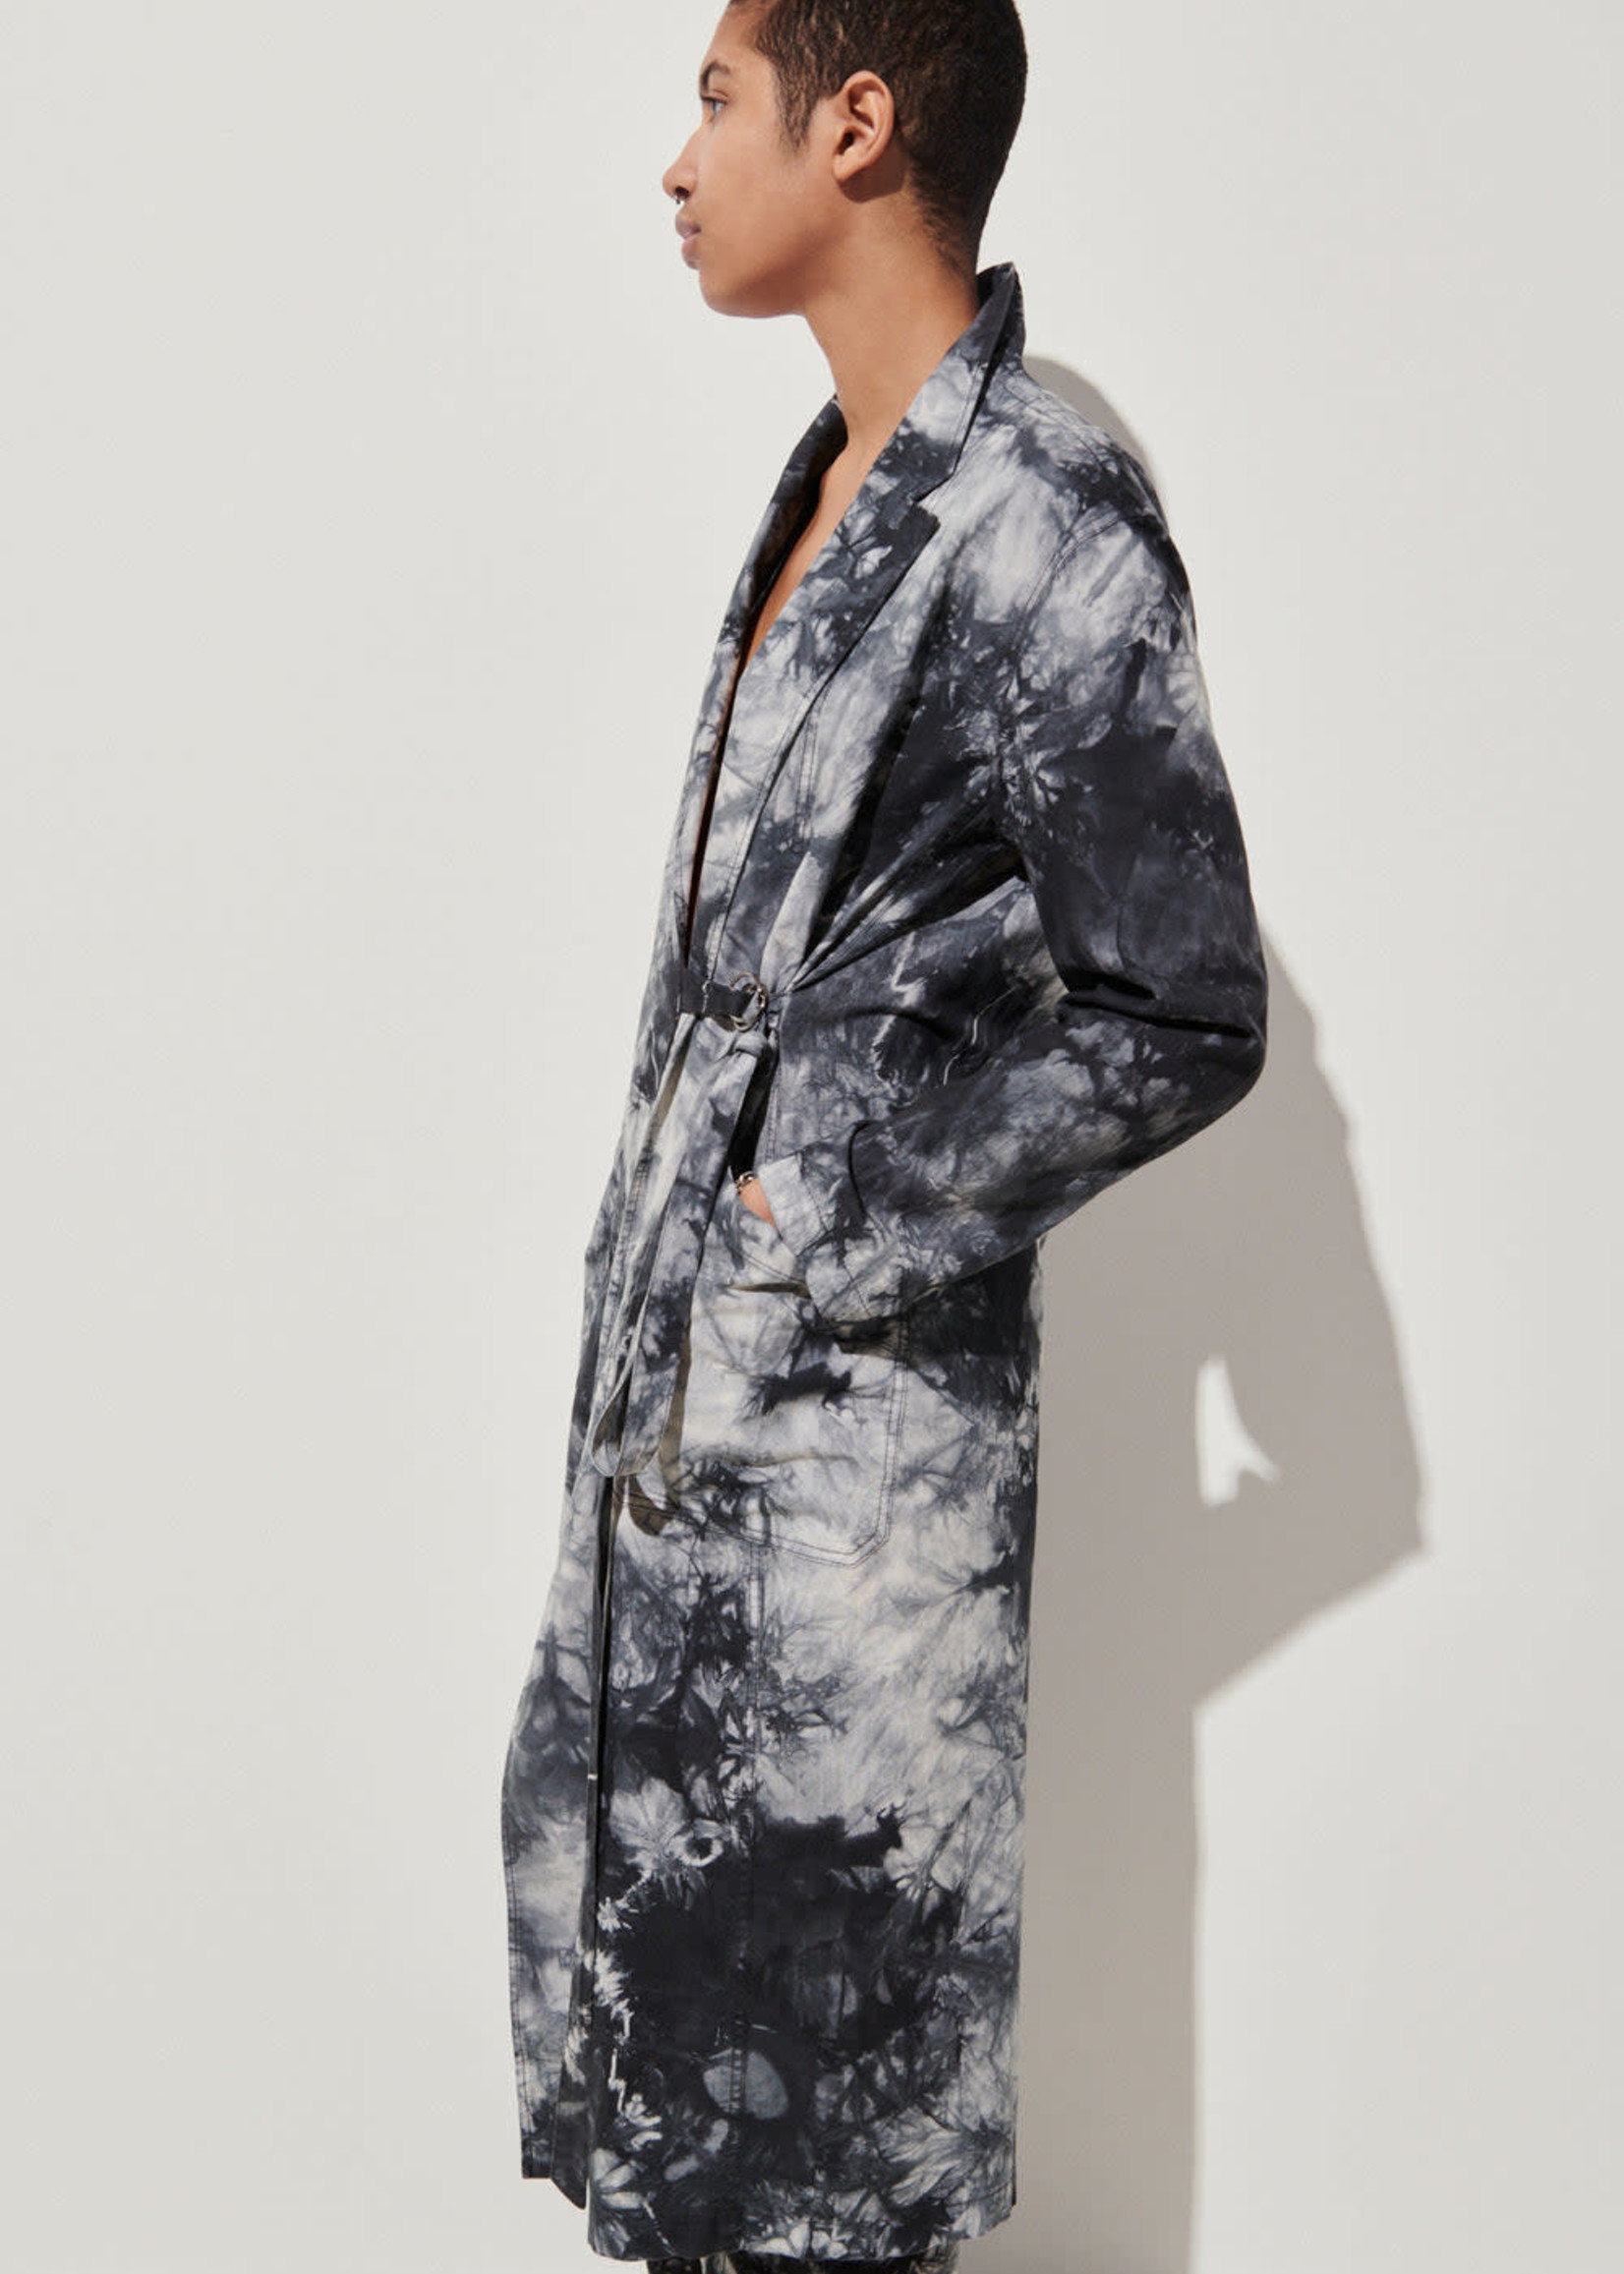 Rachel Comey Lavoro Tie Dyed Wrap Dress in Grey and Black